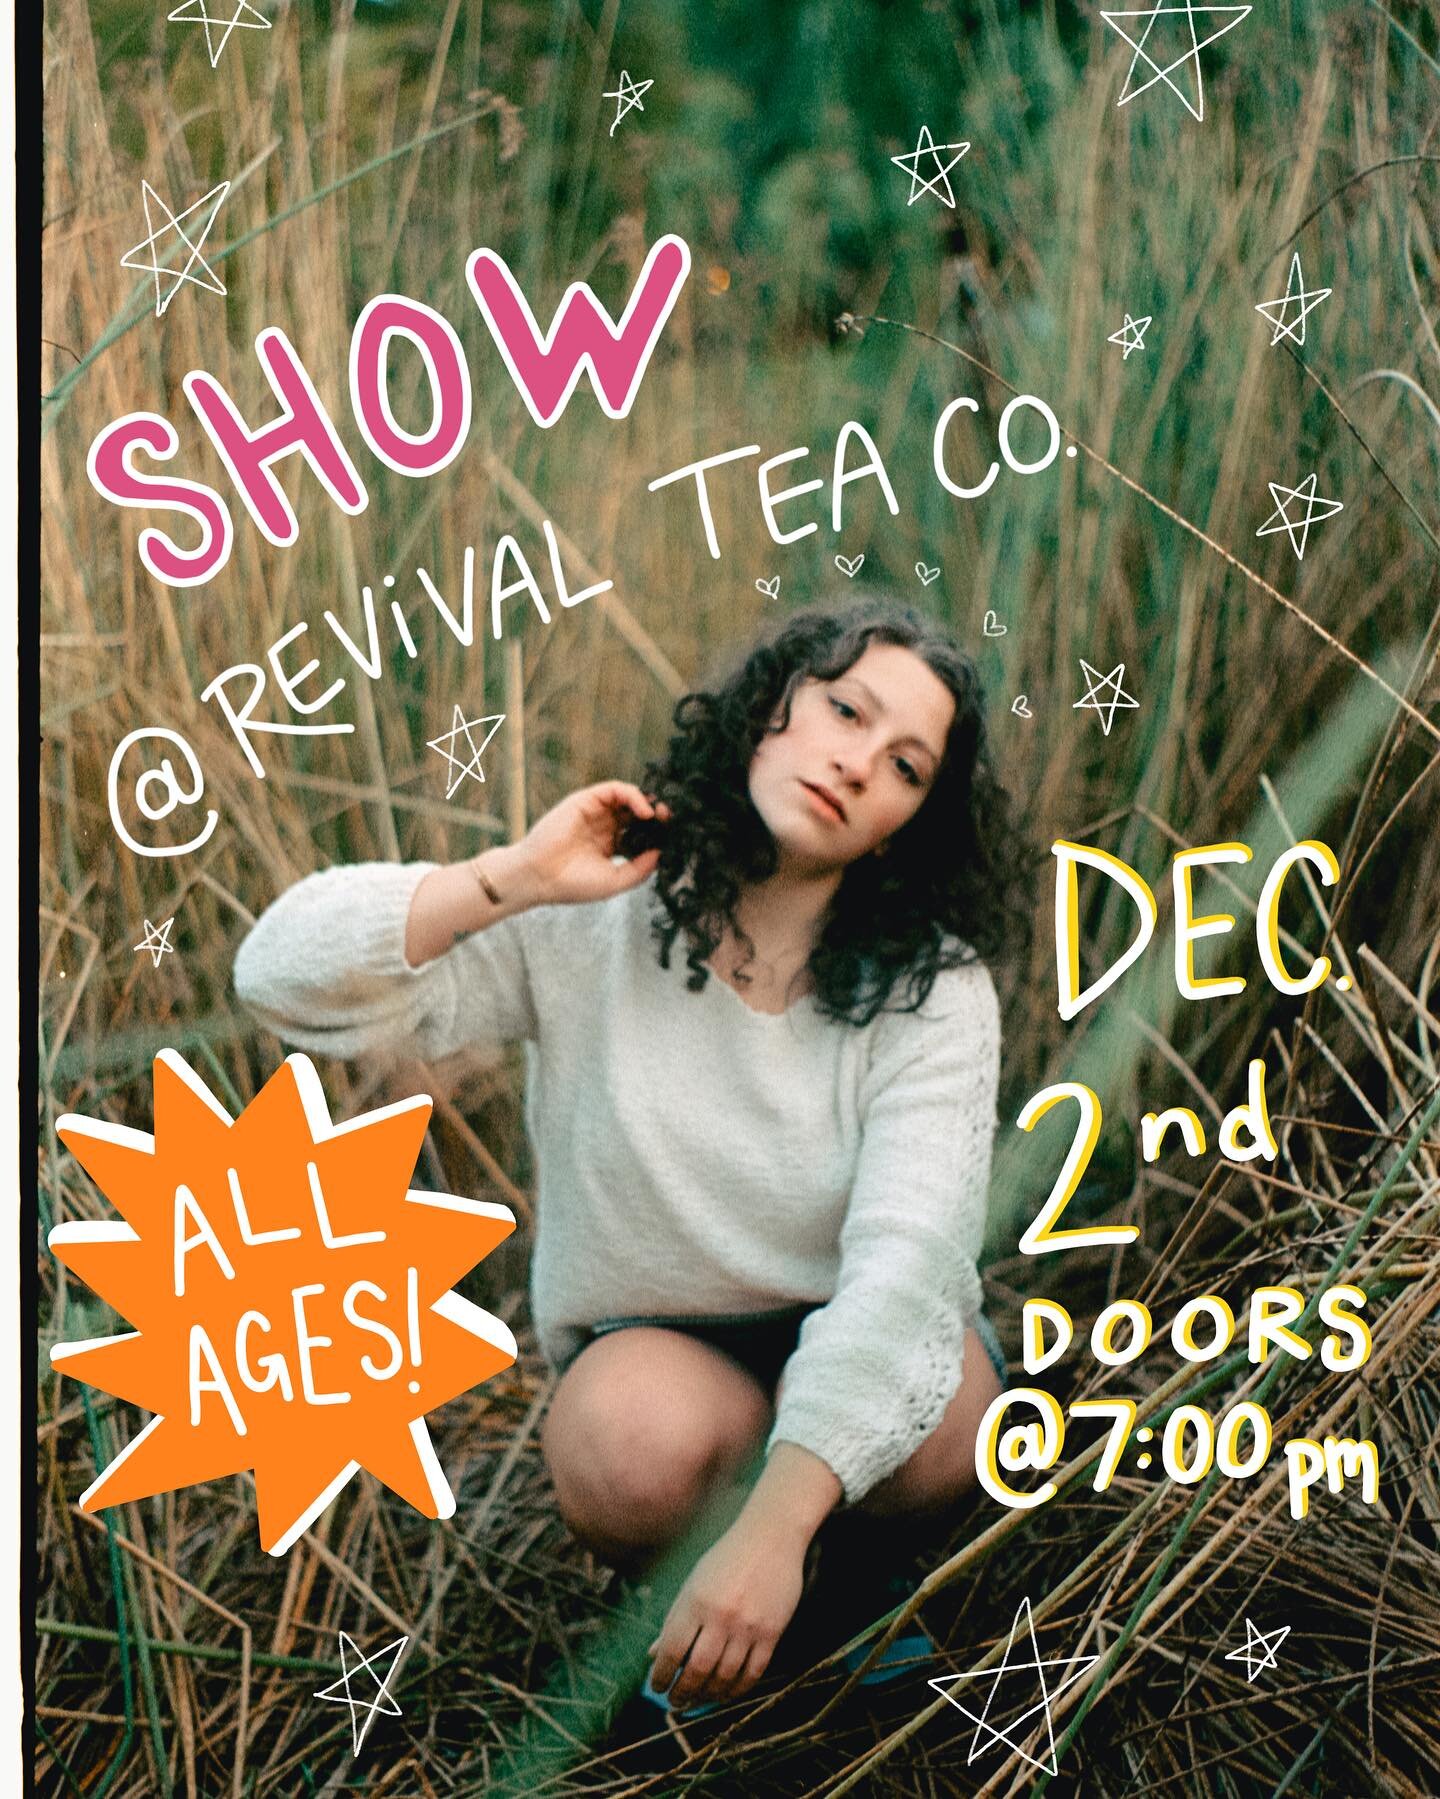 A week and a half away from my show @revivalteacompany hosted by @rosethrow 🫖💛💙
⠀⠀⠀⠀⠀⠀⠀⠀⠀⠀⠀⠀
Some important details:
⭐️Saturday, December 2nd, doors open at 7:00 pm at Revival Tea downtown
✨ ALL AGES!!! There are so few all ages venues in Spokane!